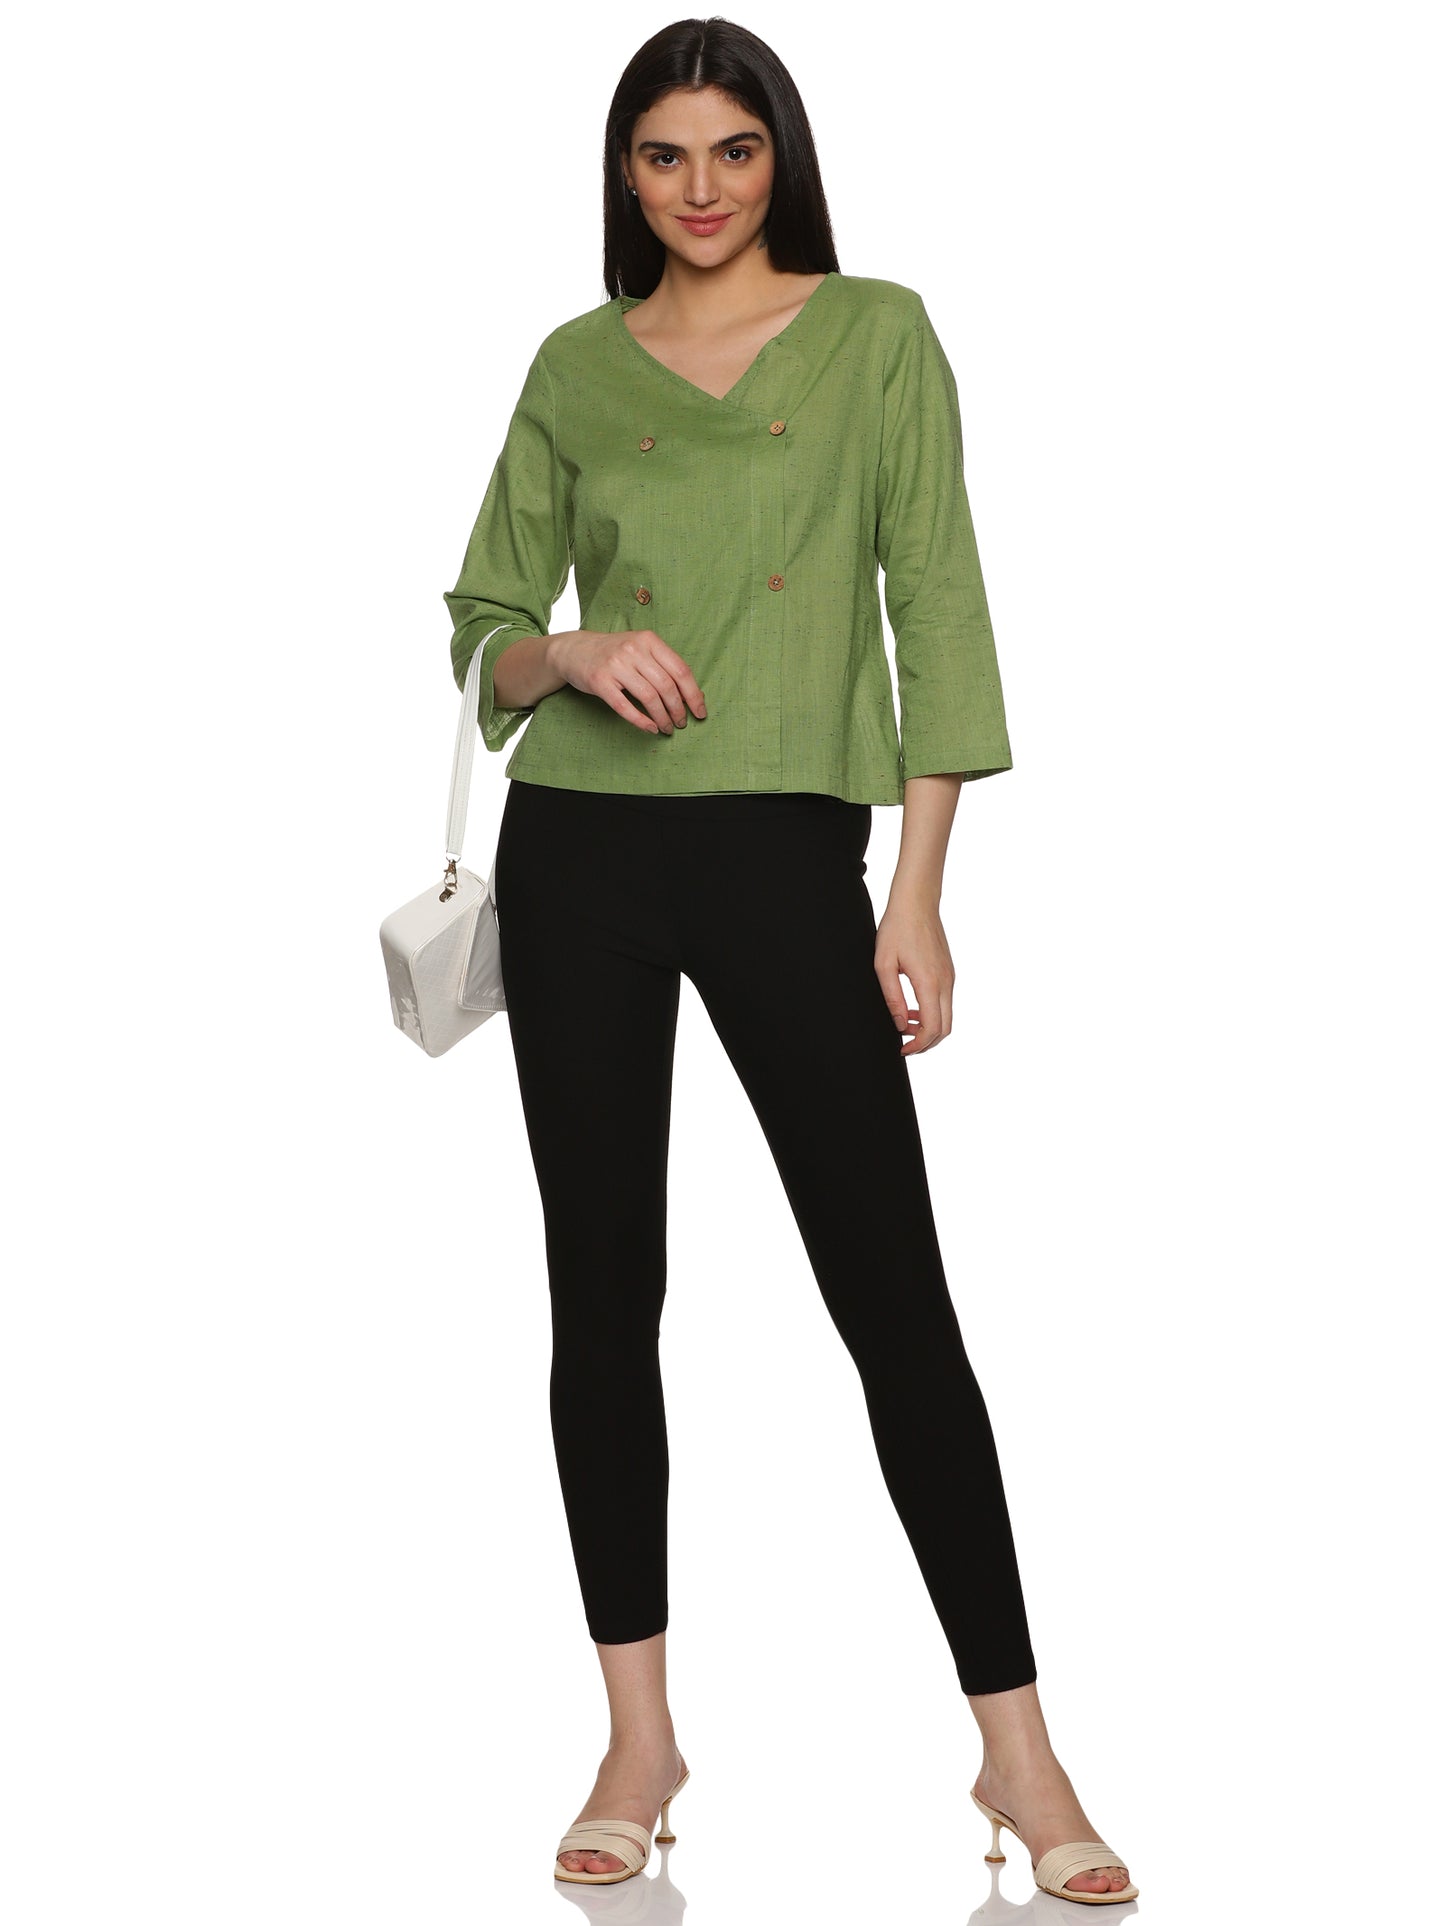 A full length view of lady in Green Asymmetric Neck Side Button Top, womens workwear 